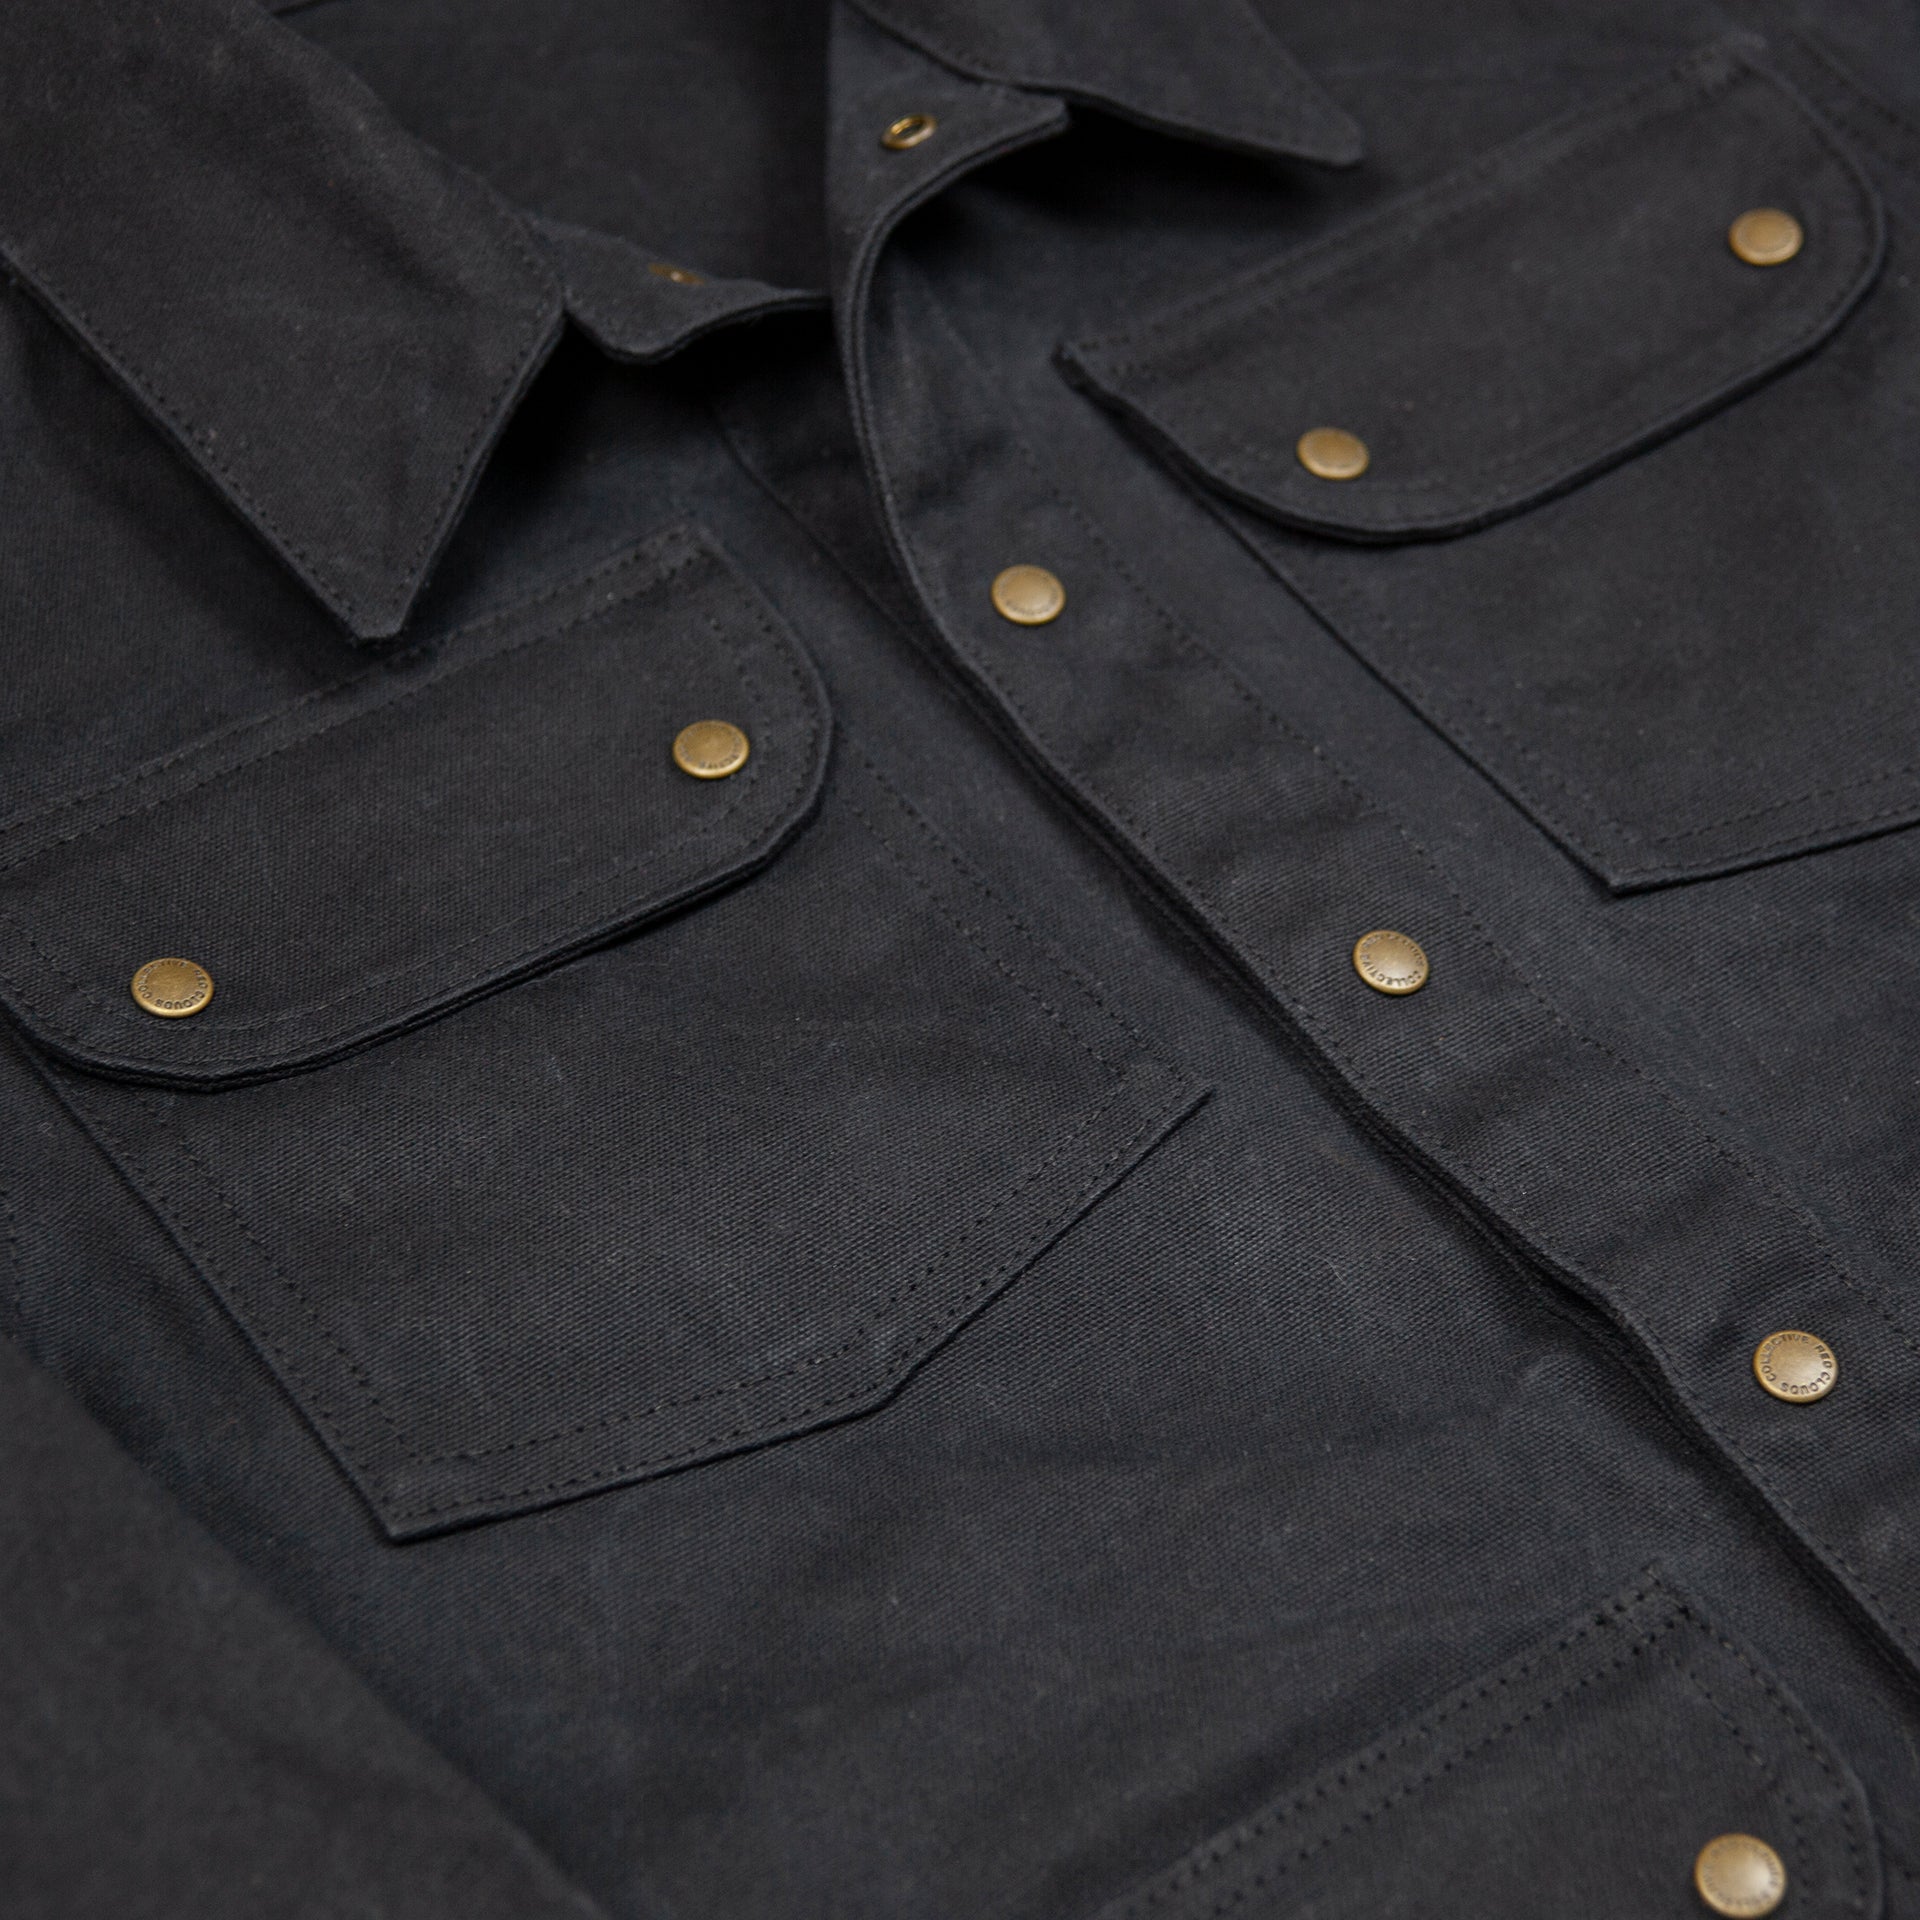 20 oz Waxed Canvas Jacket - Black - Red Clouds Collective - Made in the USA